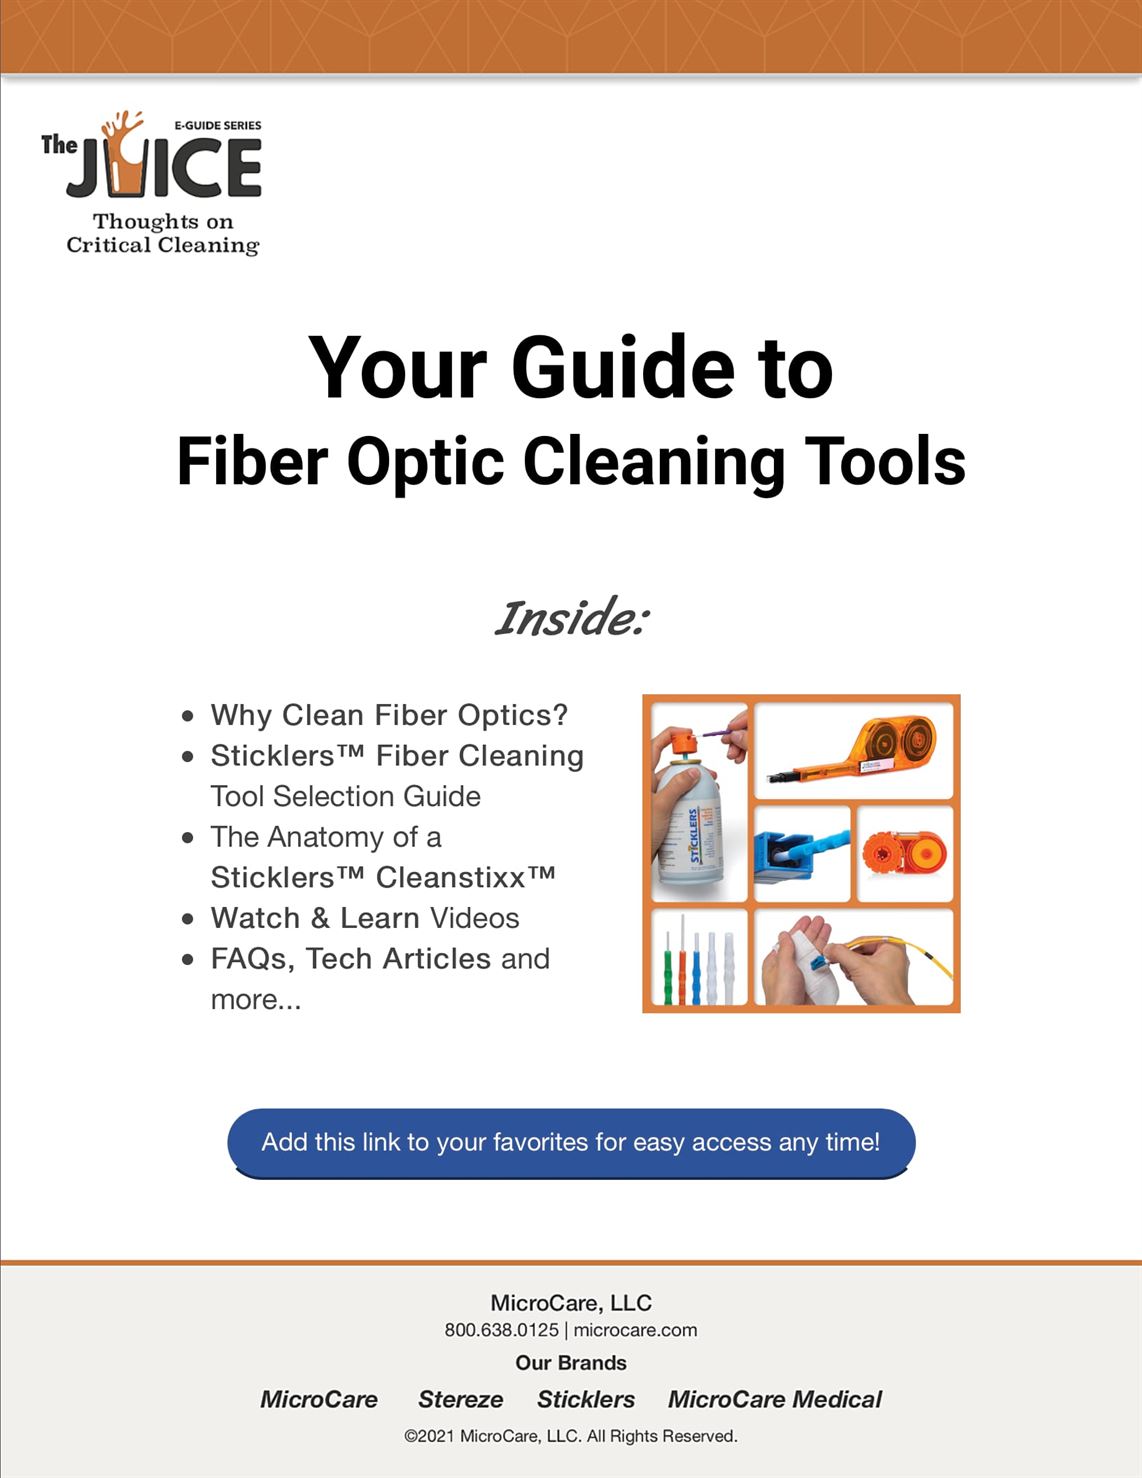 Your Guide to Fiber Optic Cleaning Tools